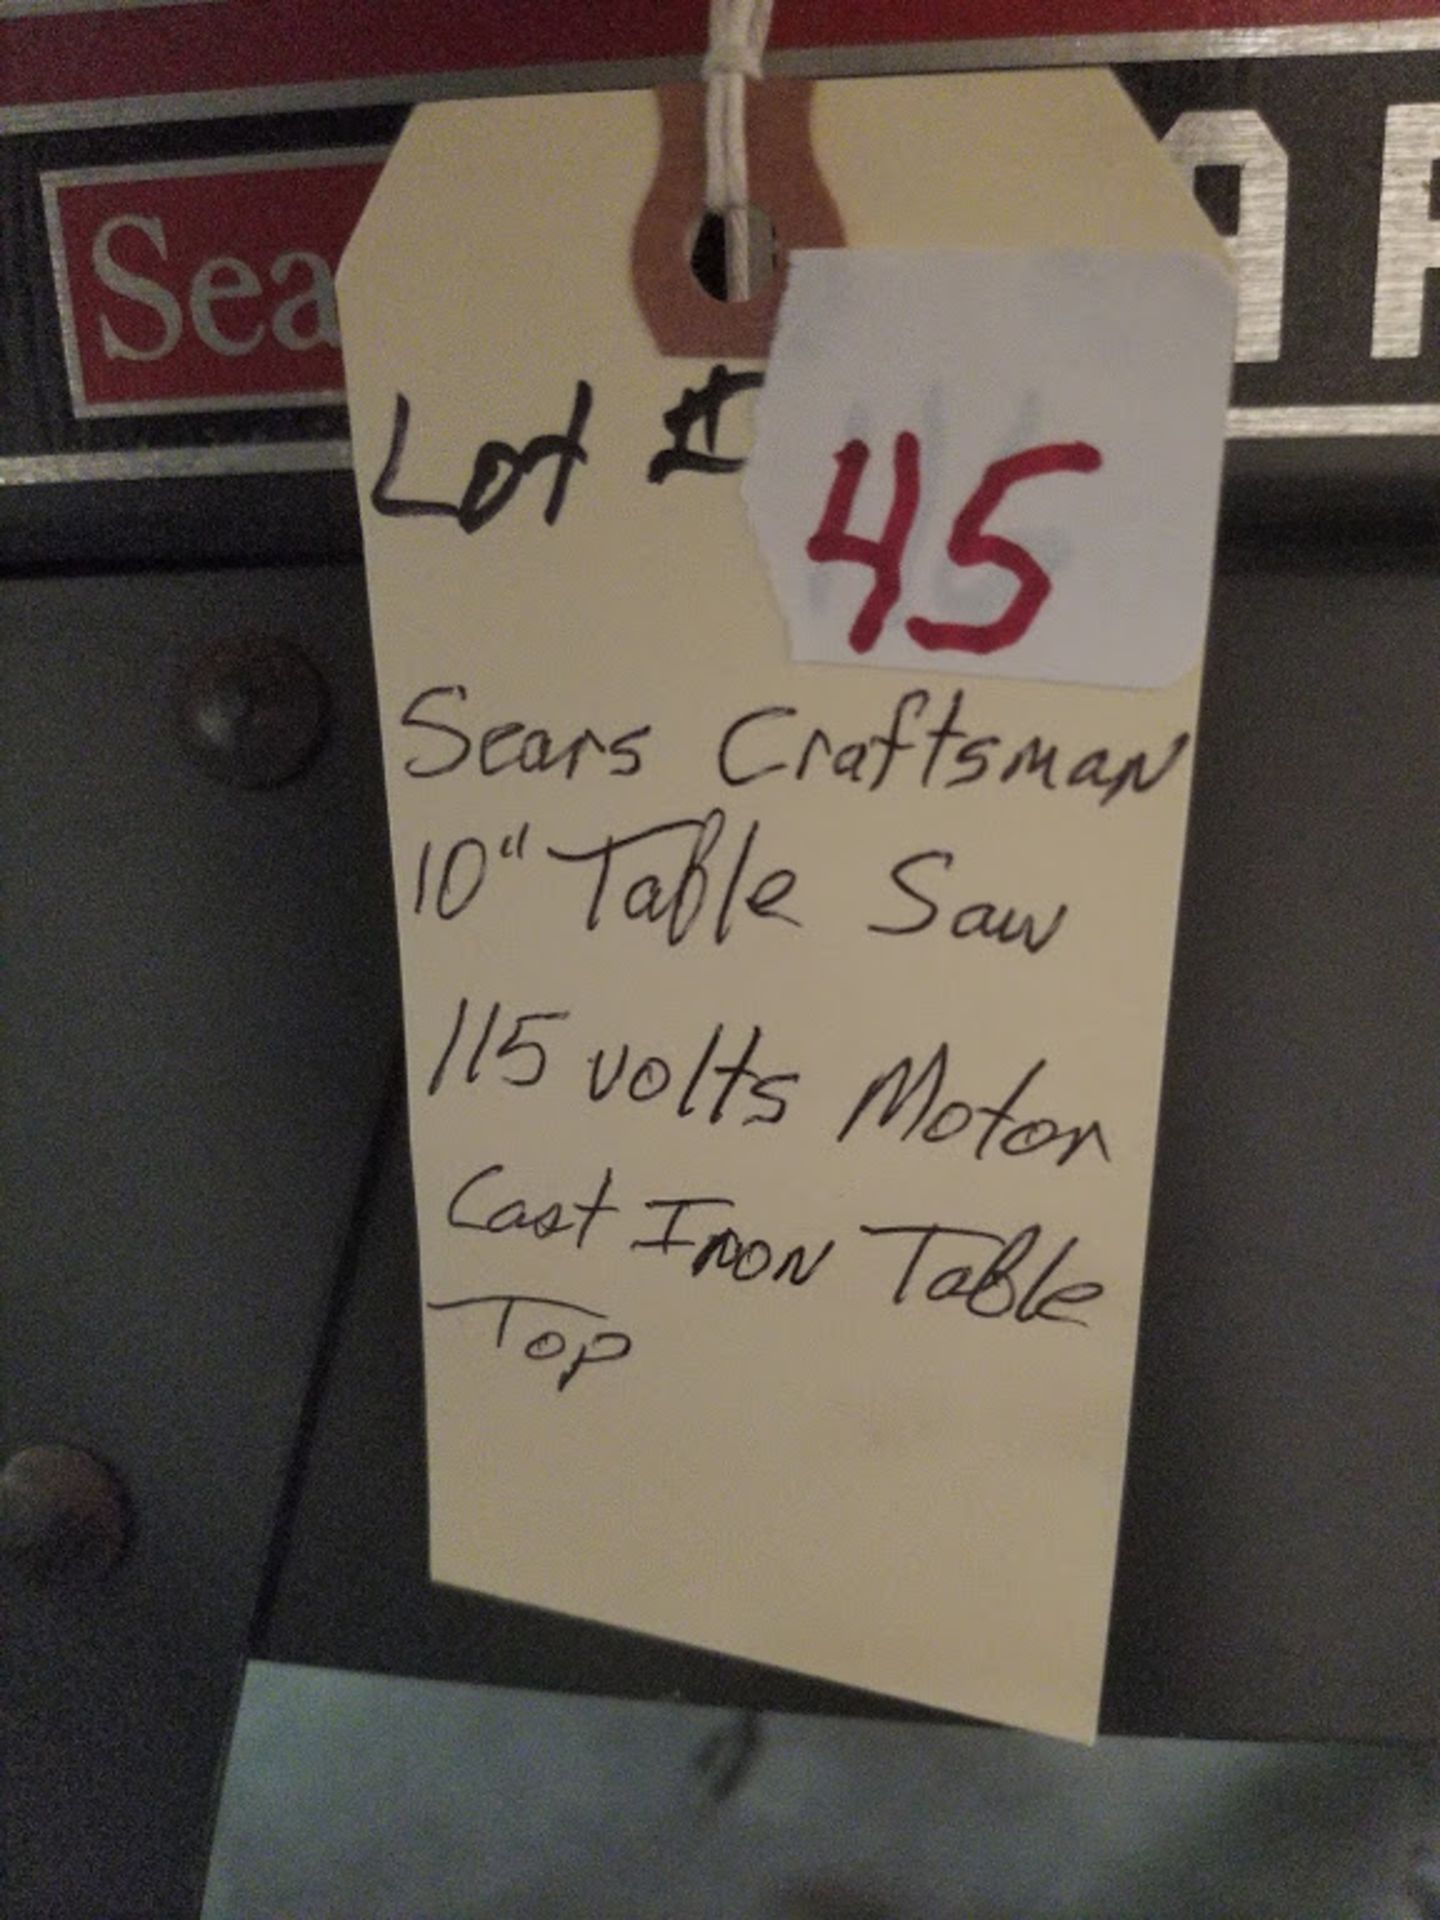 Sears Craftsman 10" Table Saw, 115 Volts Motor Cast Iron Table Top - Image 3 of 5